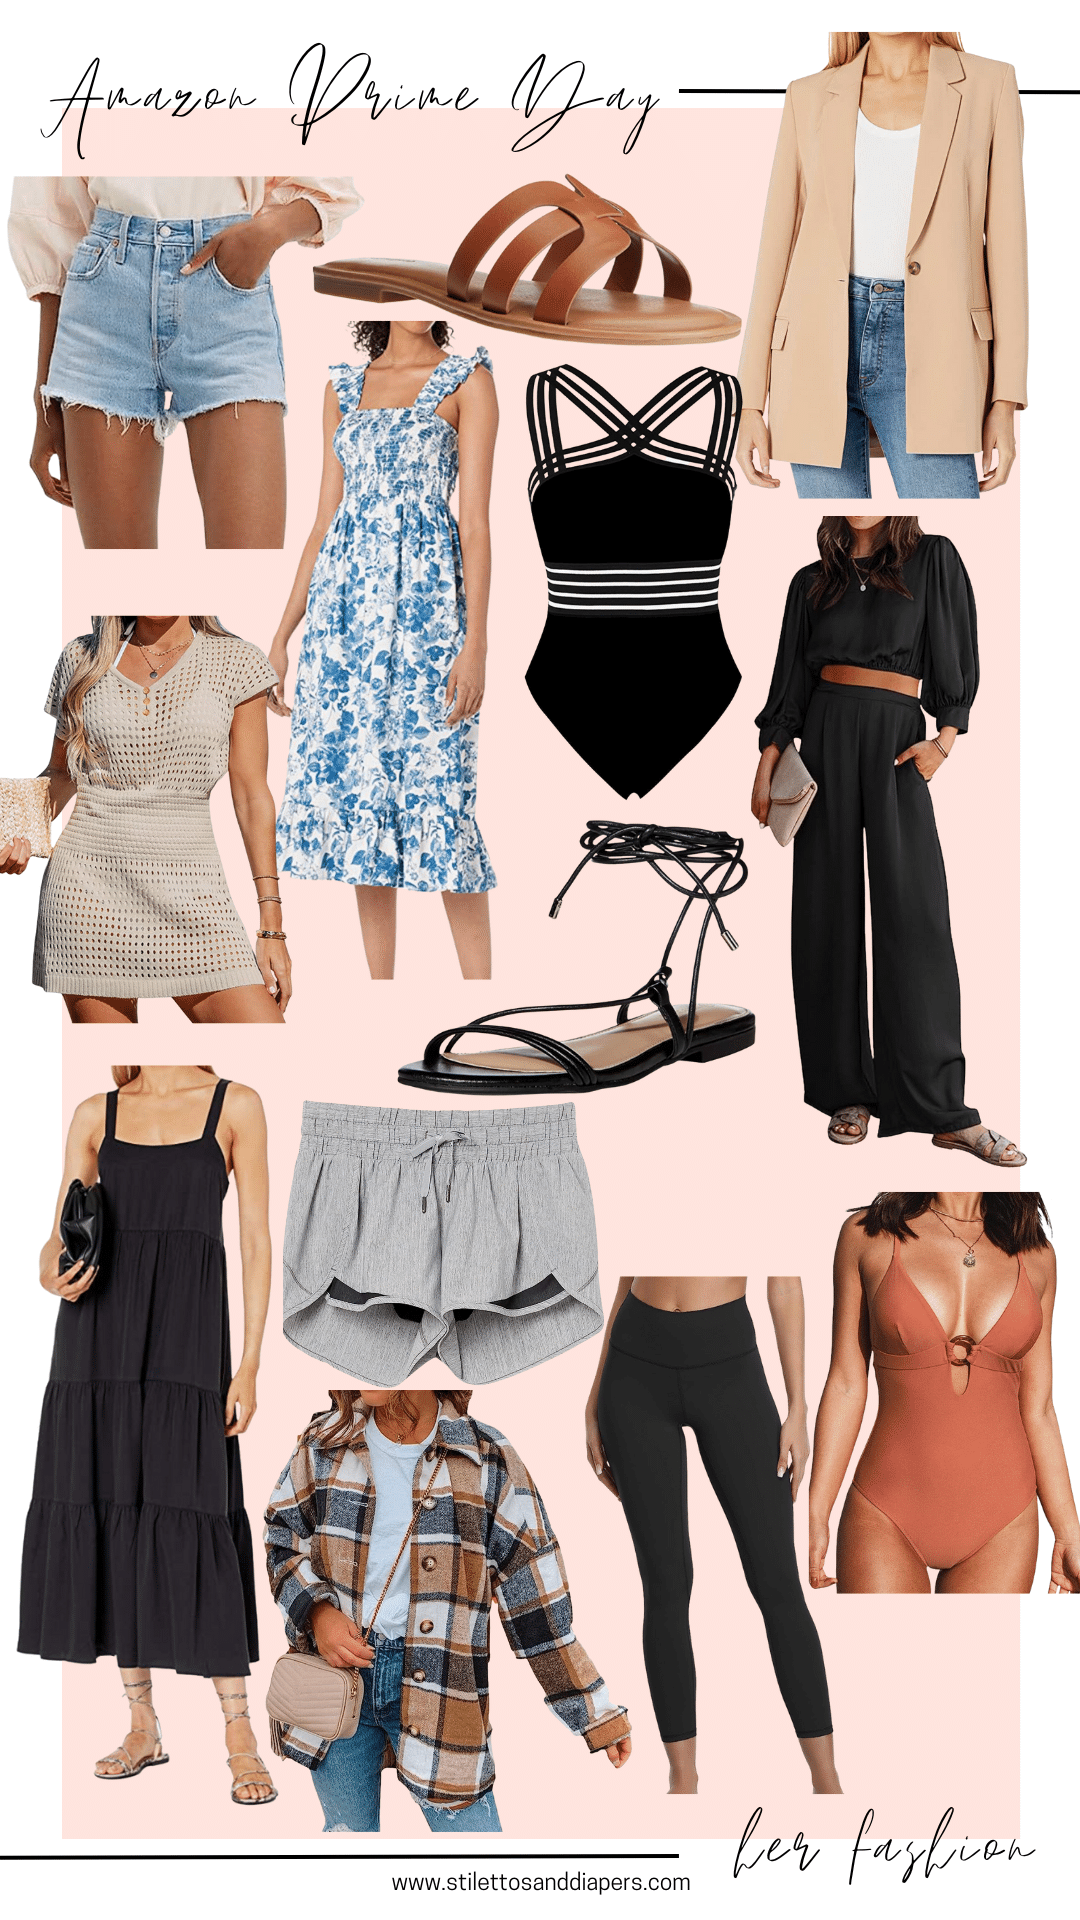 Best Deals of Amazon PrimeDay - Fashion for Her 